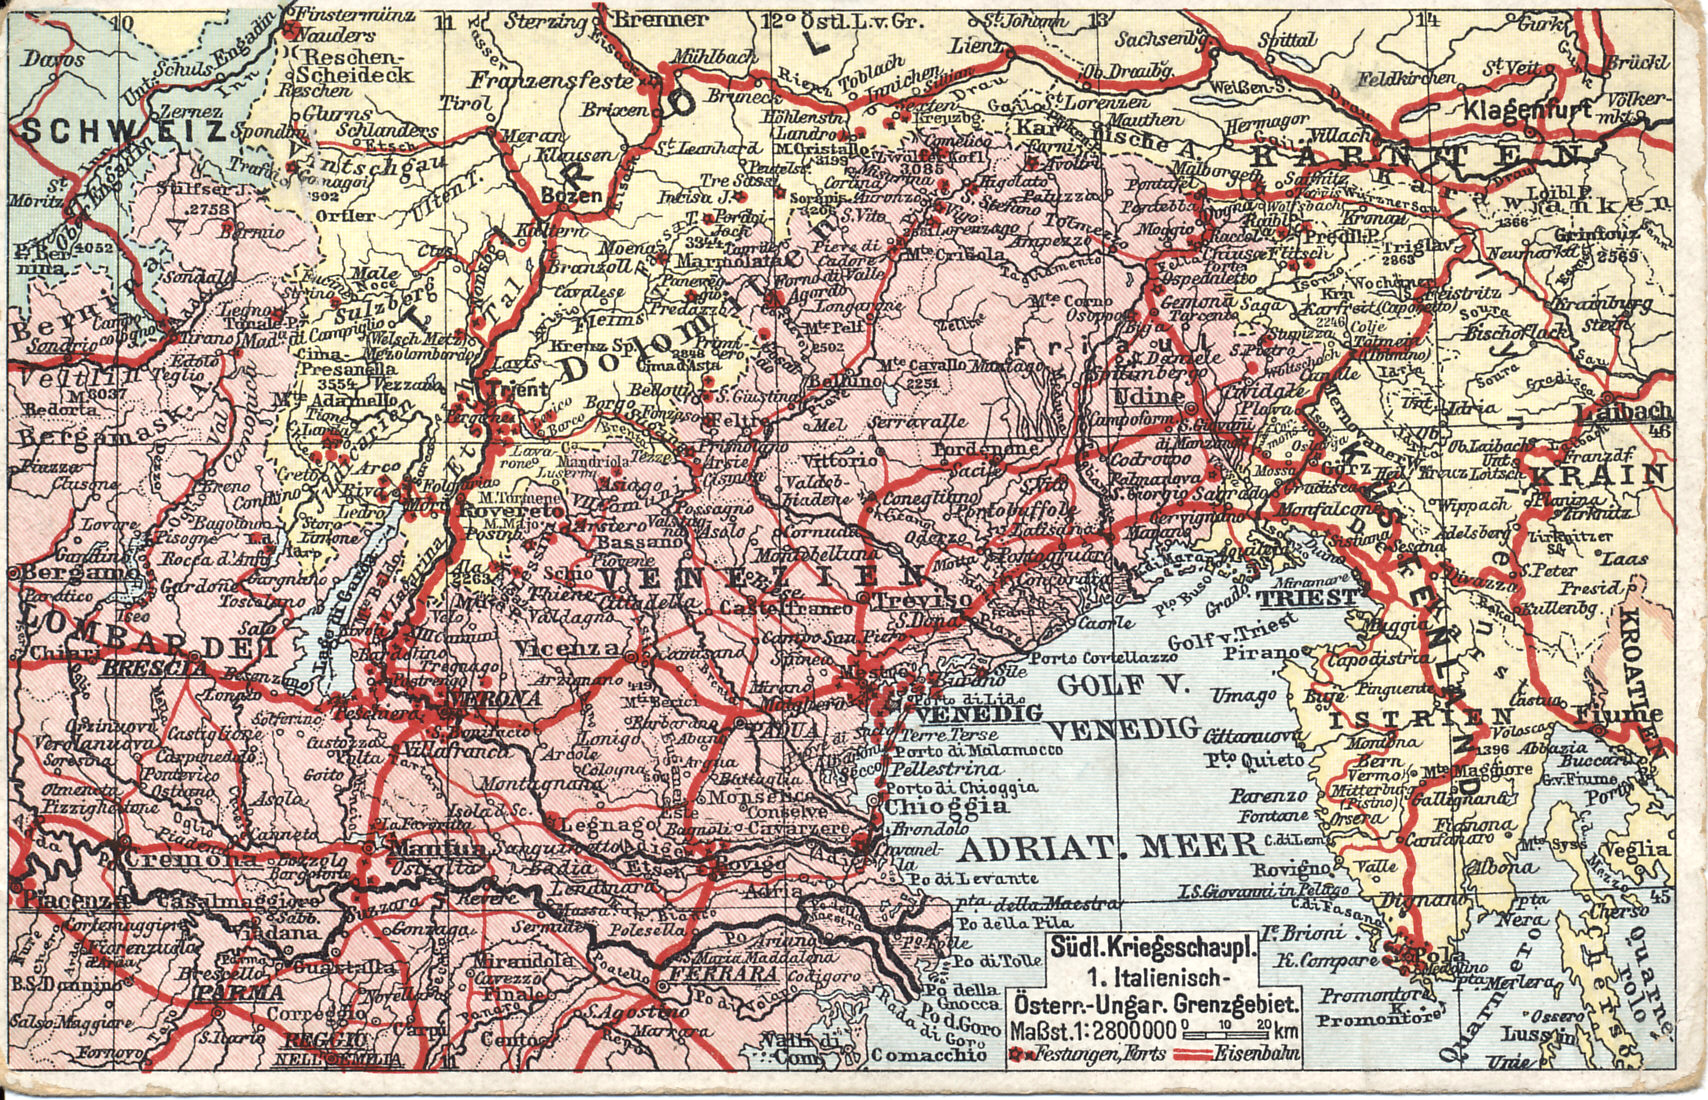 Map of northeastern Italy, the border with Austria-Hungary, and the northern Adriatic. Red lines mark railroads and red dots forts.
Text:
Südl. Kriegsschauplatz, 1. Italienisch-Österr.-Ungarn Grenzgebiet (Southern theater of operations. 1. Italian-Austrian-Hungarian border area)
Reverse:
Postkarte des südlichen (Ital.-Österr.-Ungar.) Kriegsschauplatzes Nr. 1. Import.
Logo LB